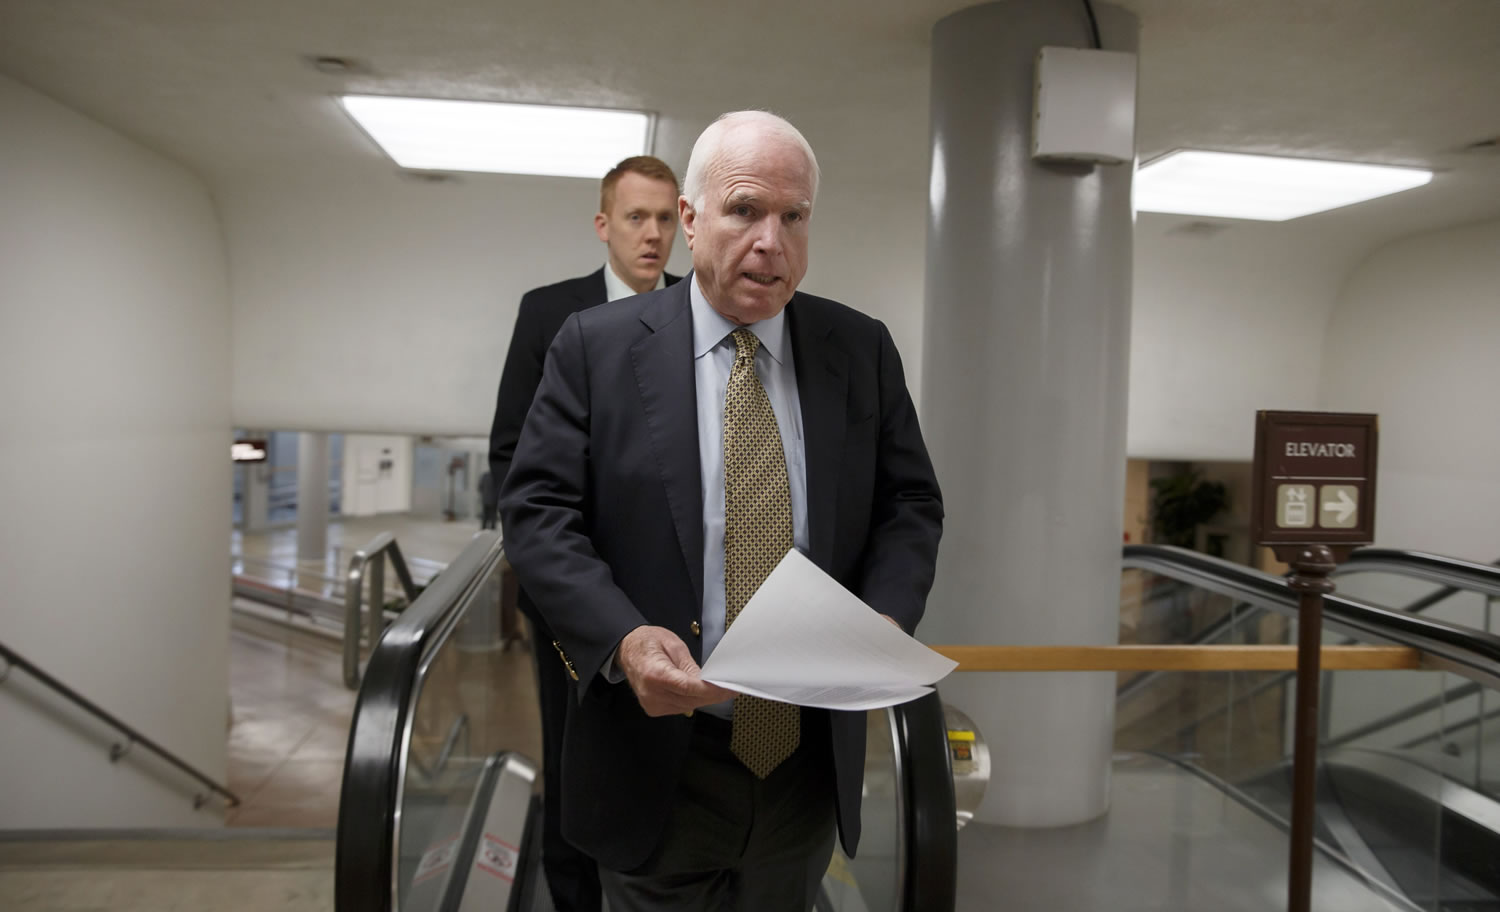 Sen. John McCain, R-Ariz., a member of the Senate Foreign Relations Committee, heads to the chamber to advance a bill providing $1 billion in loan guarantees to Ukraine as President Barack Obama meets with U.S.